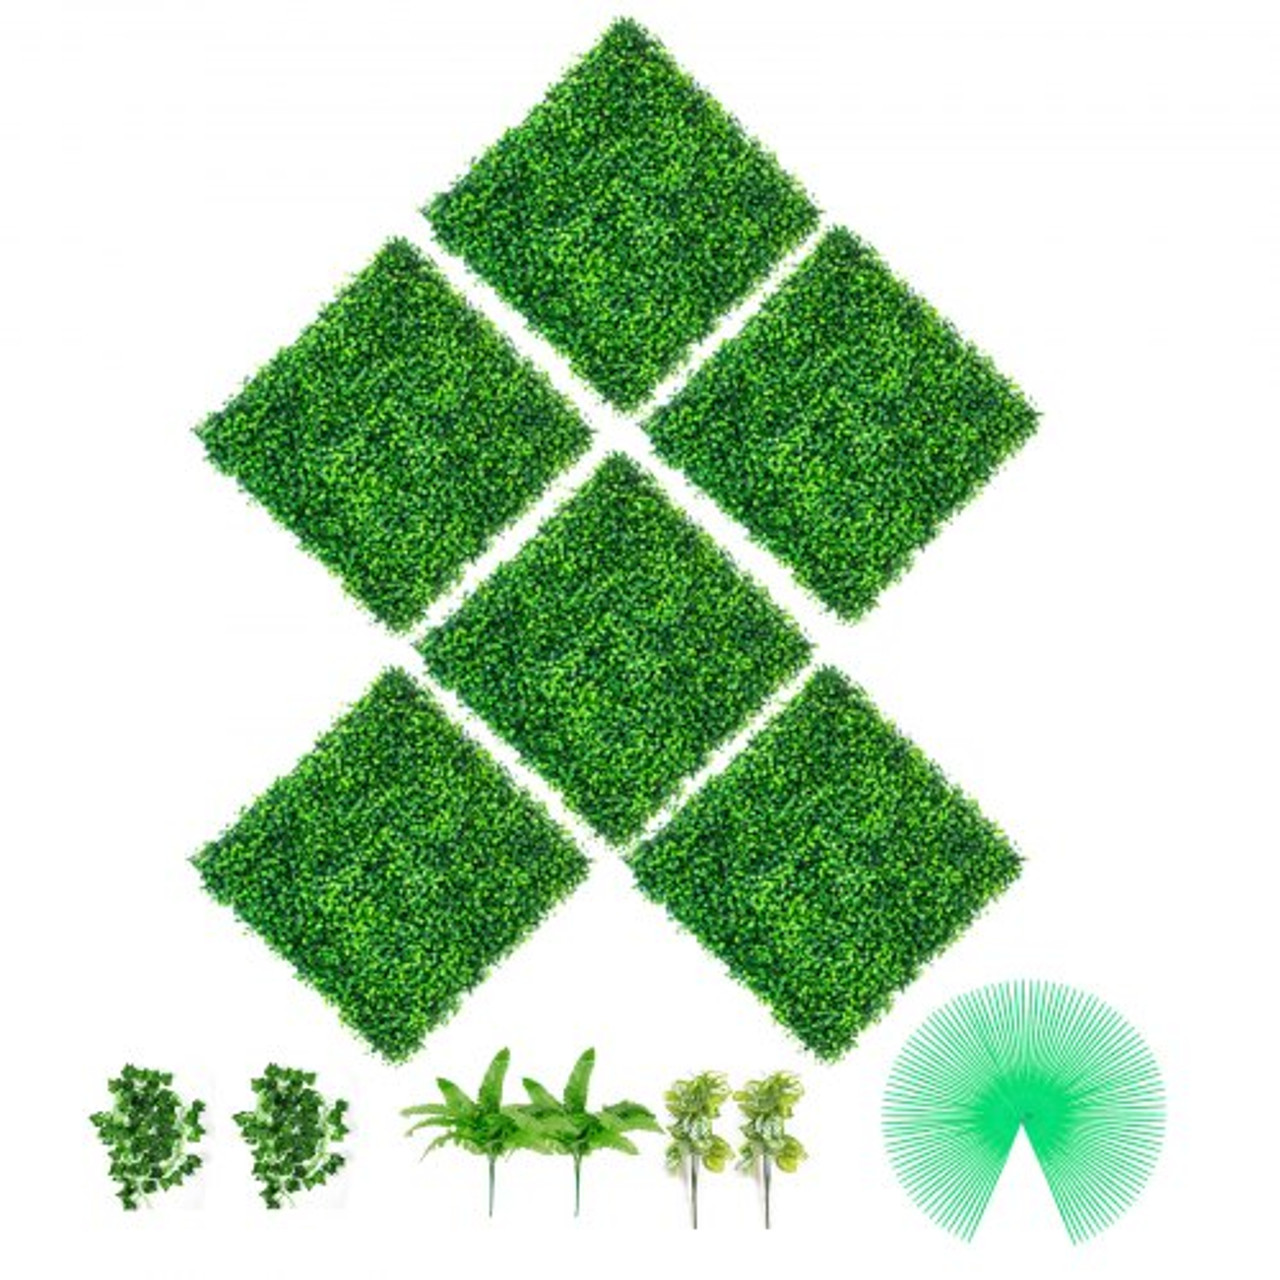 Artificial Boxwood Panels, 6 PCS 20"x20" Boxwood Hedge Wall Panels, PE Artificial Grass Backdrop Wall 1.6", Privacy Hedge Screen for Decoration of Outdoor, Indoor, Garden, Fence, and Backyard